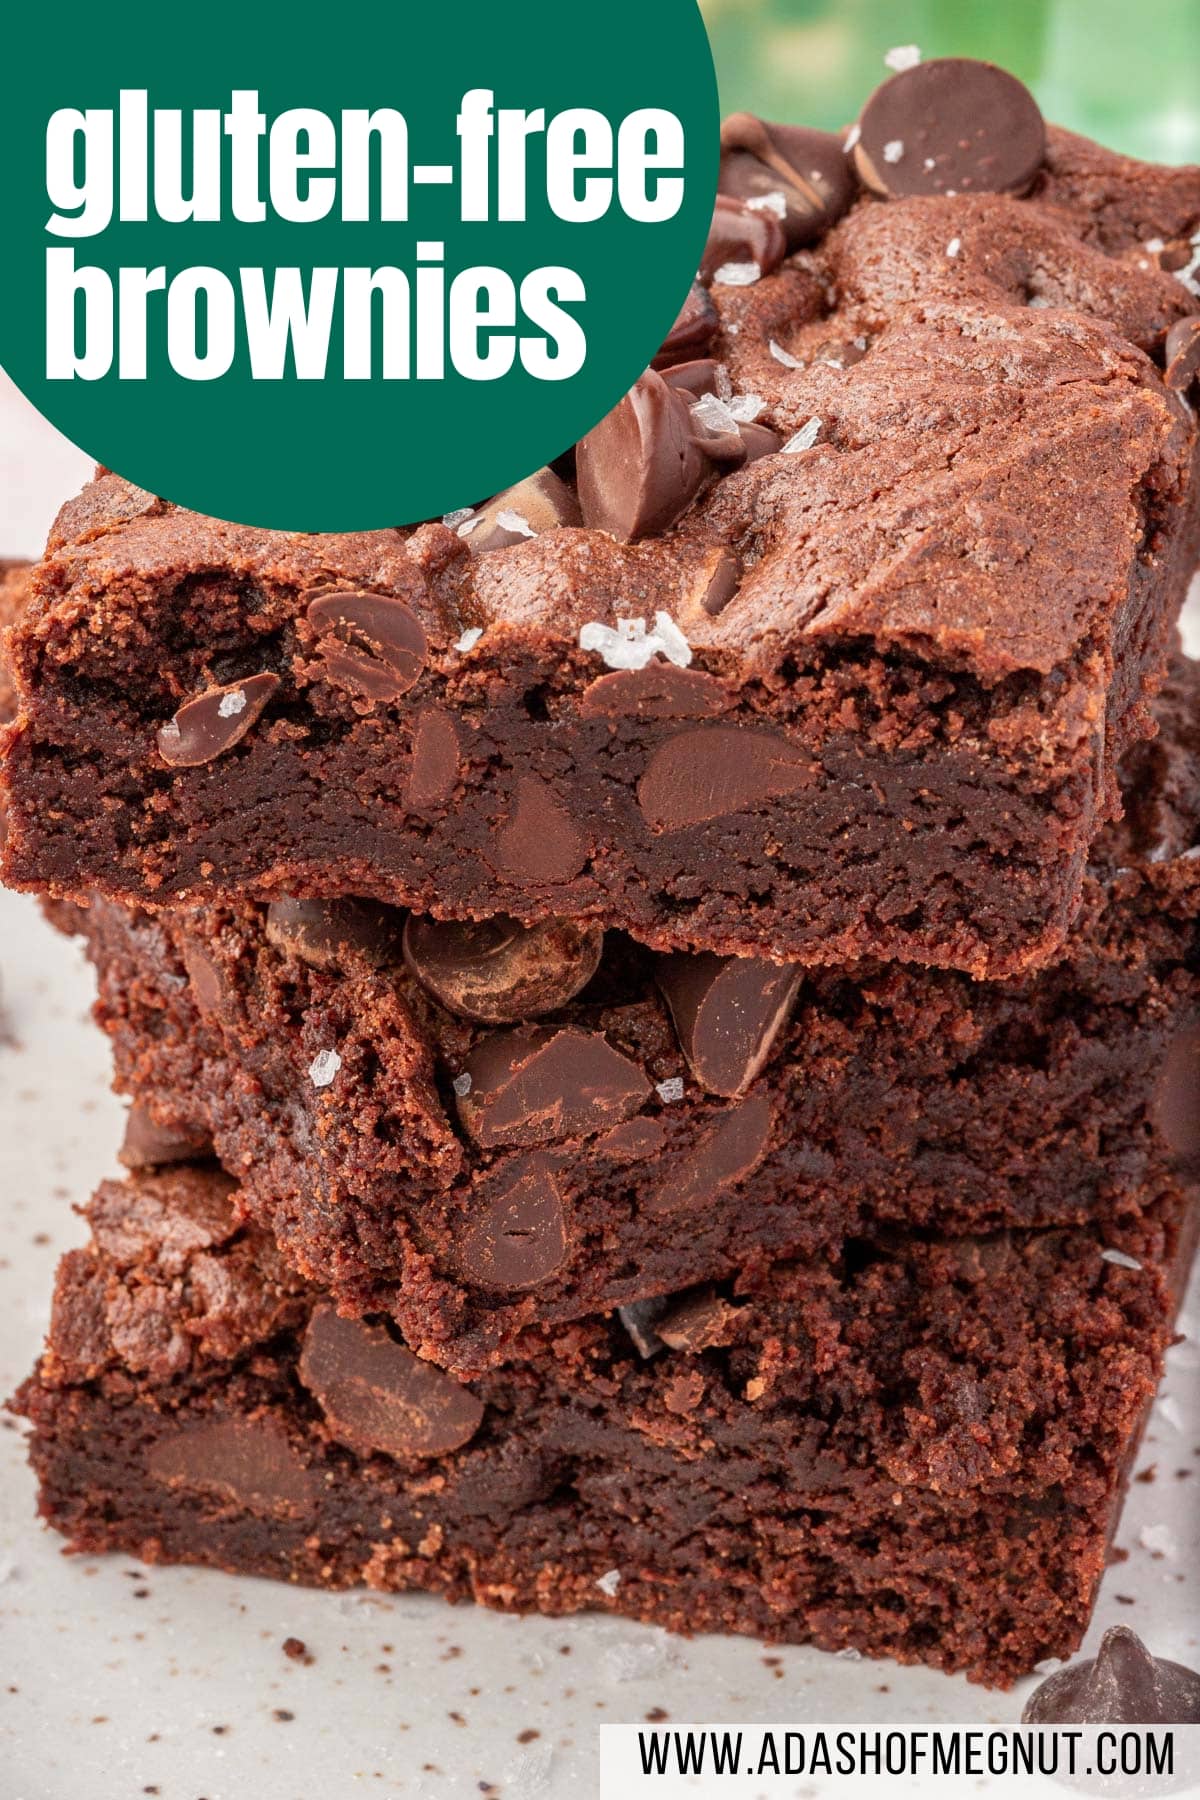 A stack of three gluten-free brownies on a small dessert plate topped with semi-sweet chocolate chips and flaky sea salt with a text overlay.